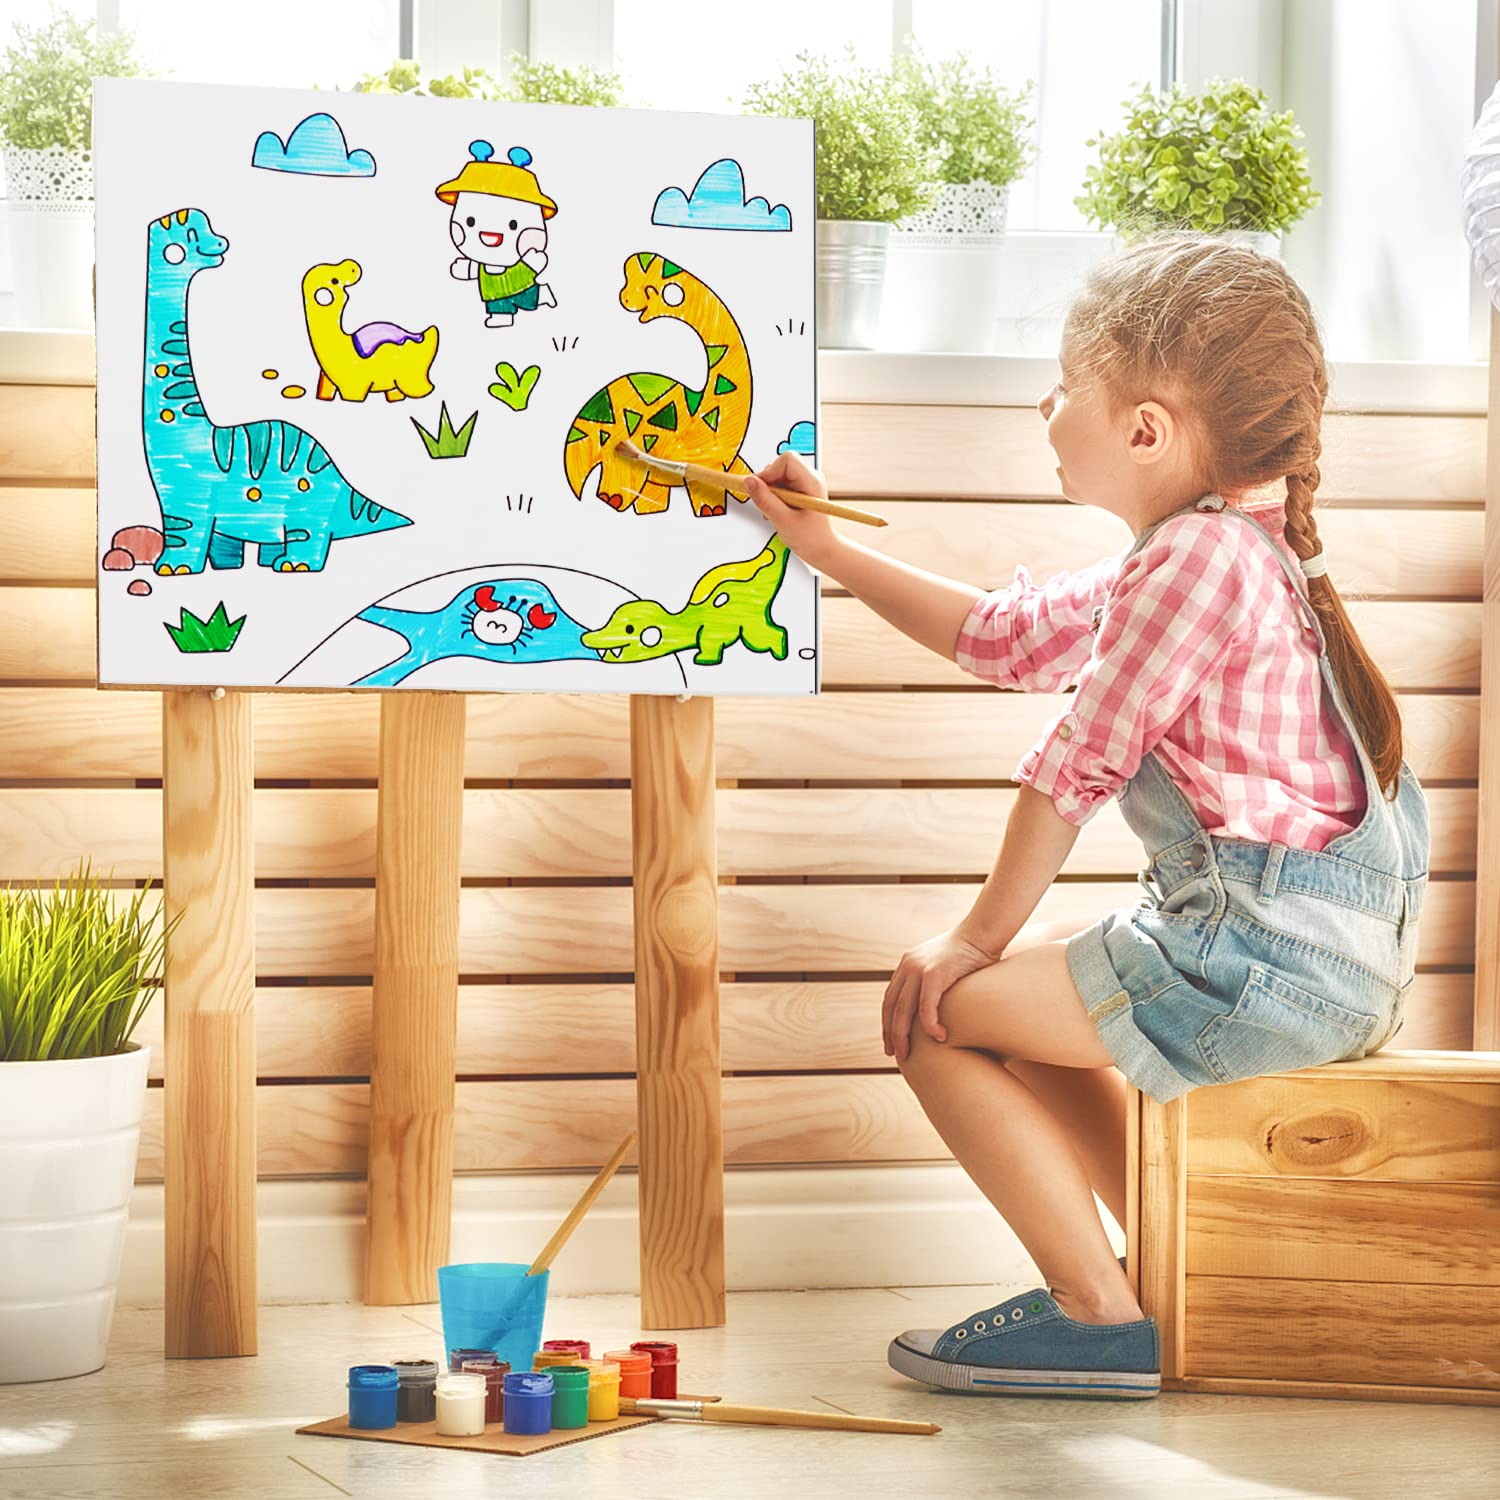 🔥HOT SALE 49% OFF - Children‘s Drawing Roll🎁